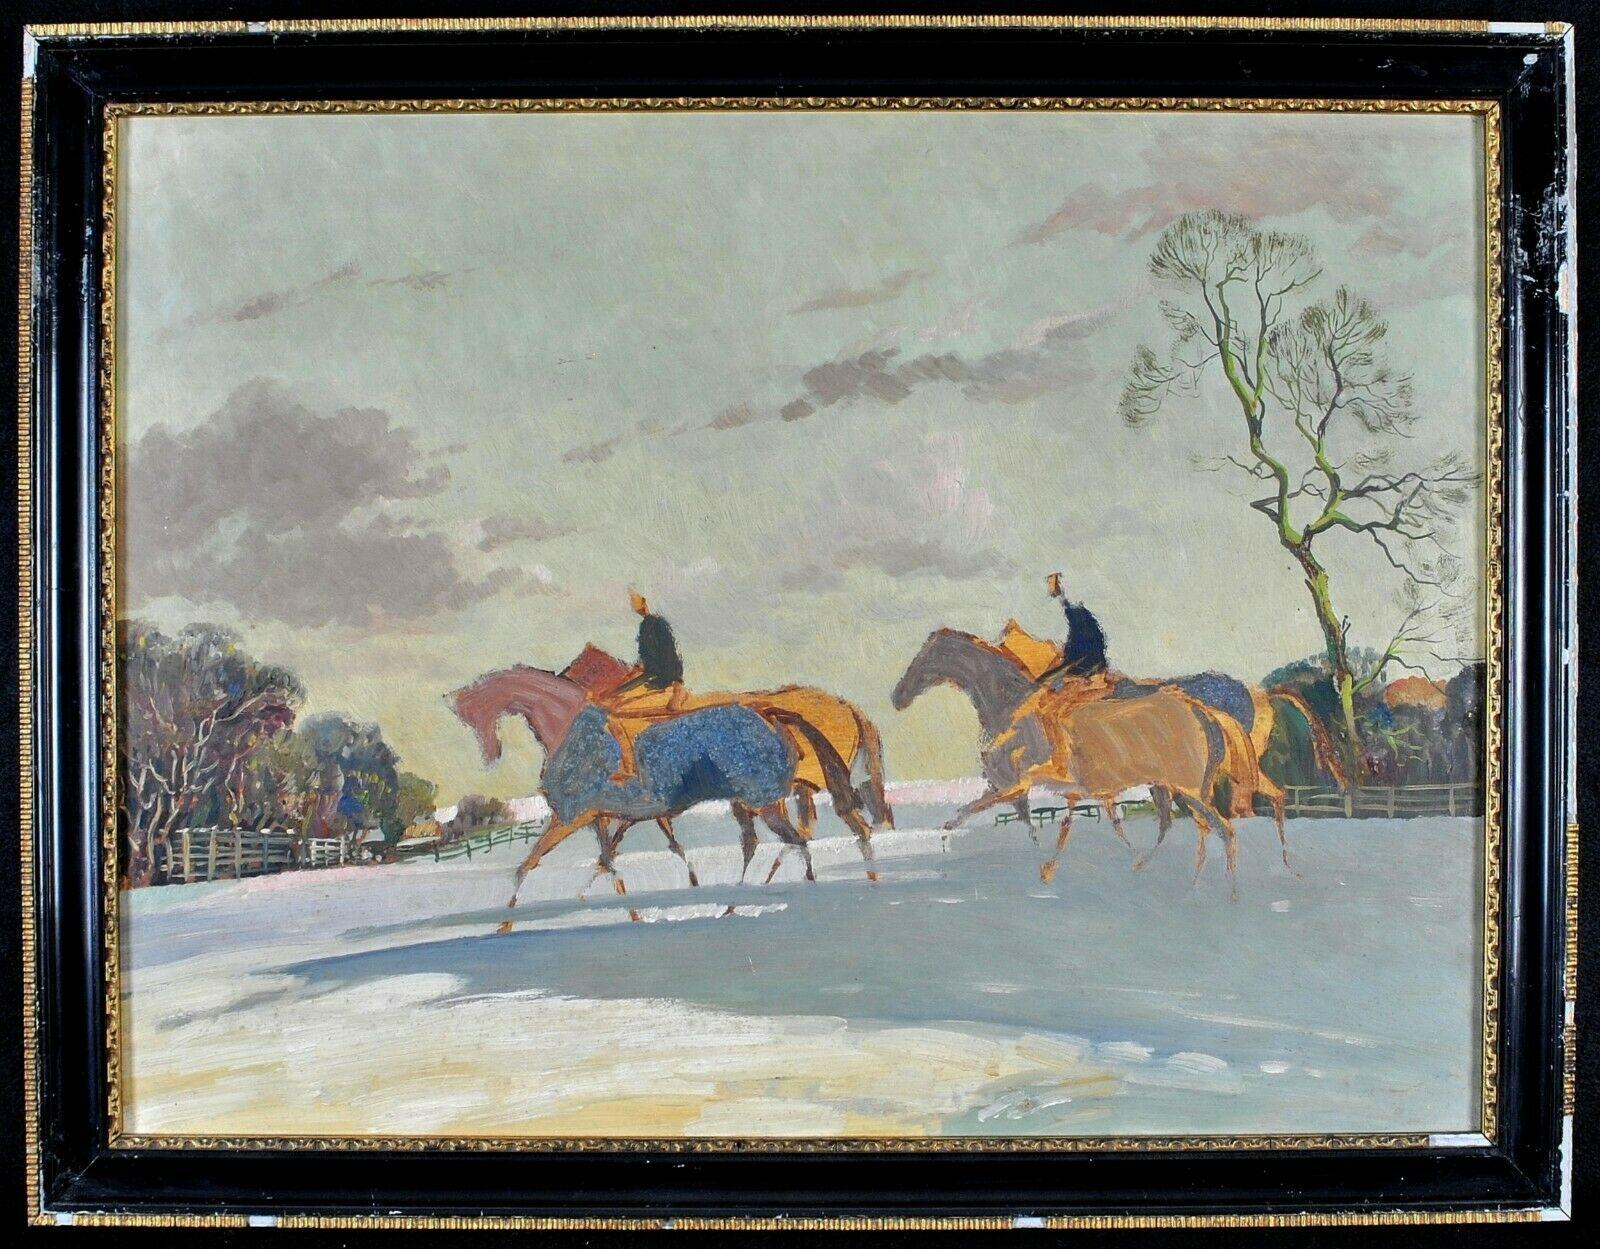 Horses in a Winter Landscape - 1950's English Oil on Board Painting Sketch